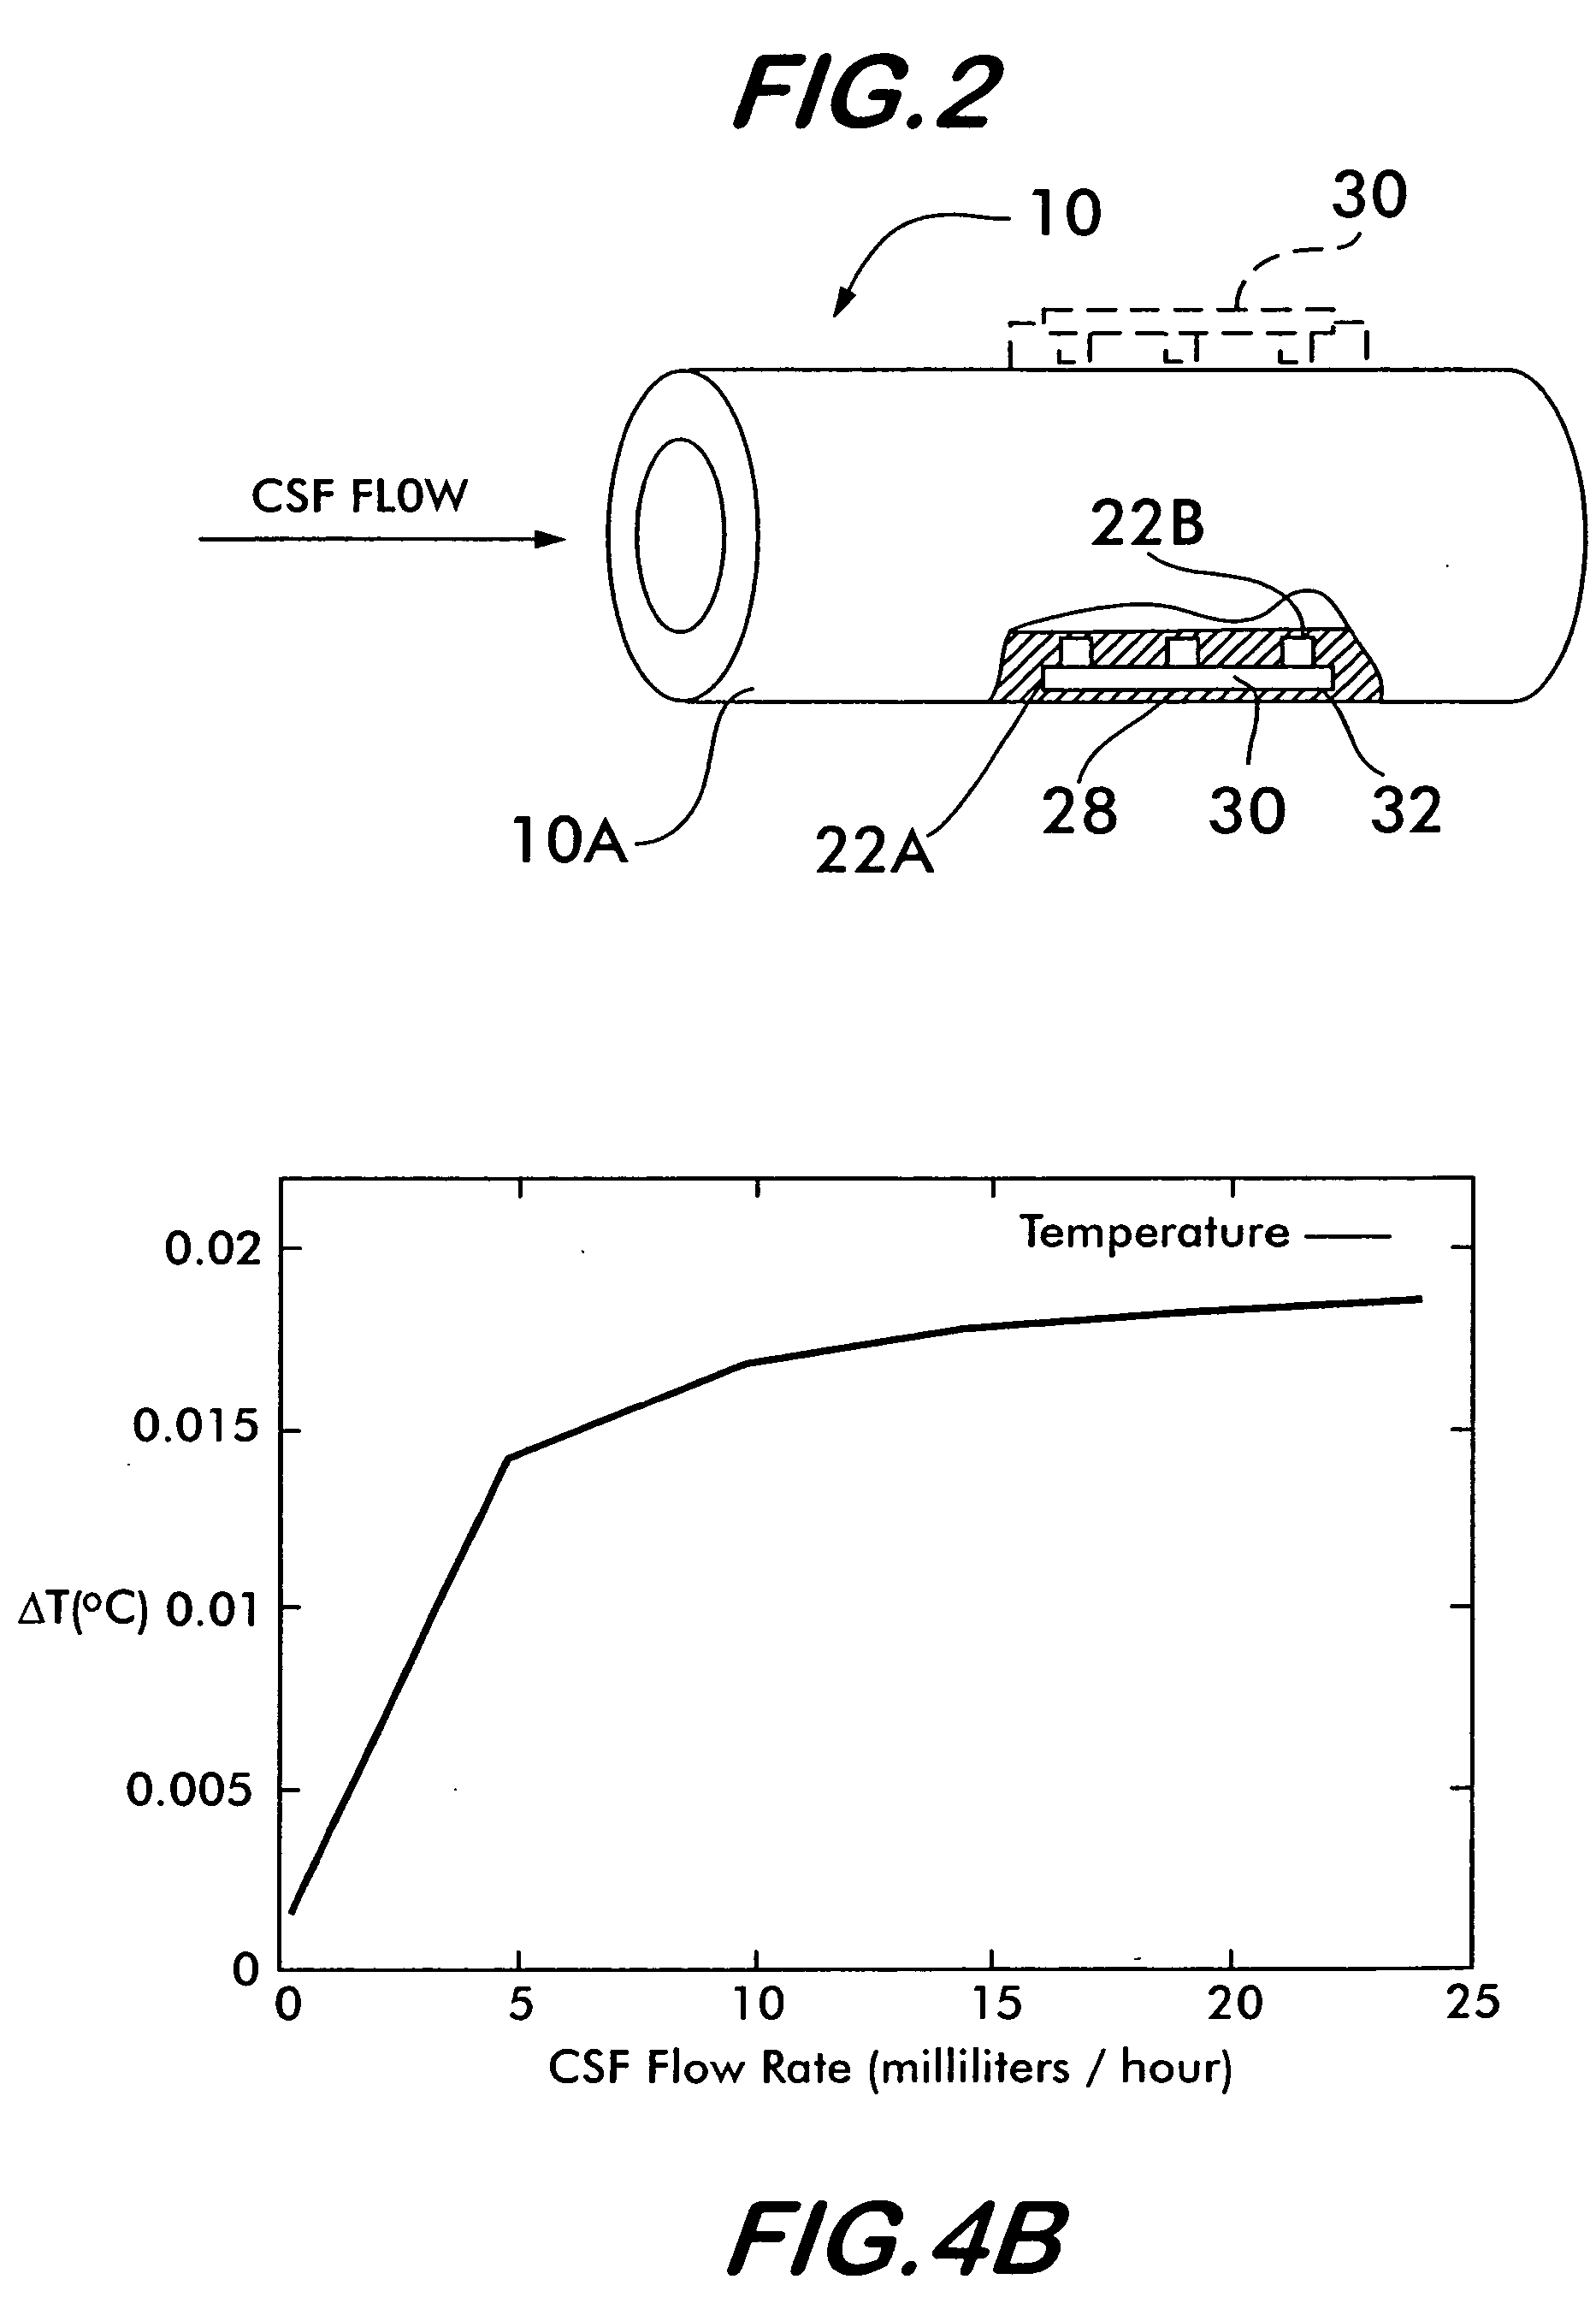 System and method for measuring flow in implanted cerebrospinal fluid shunts